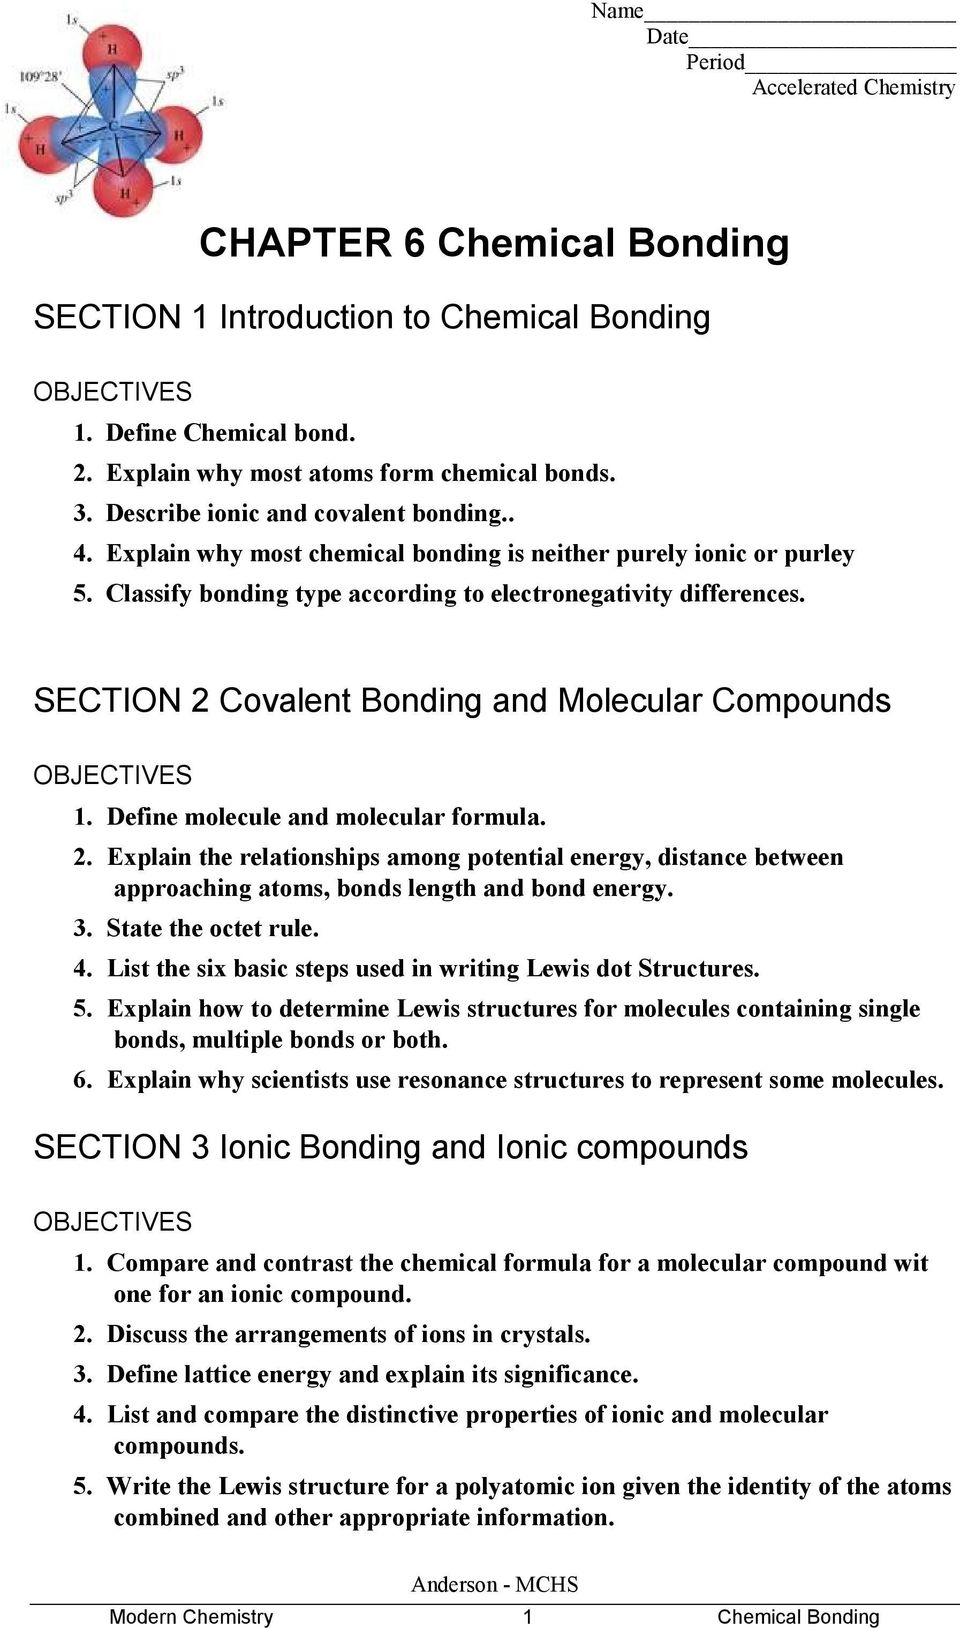 SECTION 2 Covalent Bonding and Molecular Compounds OBJECTIVES 1. Define molecule and molecular formula. 2. Explain the relationships among potential energy, distance between approaching atoms, bonds length and bond energy.